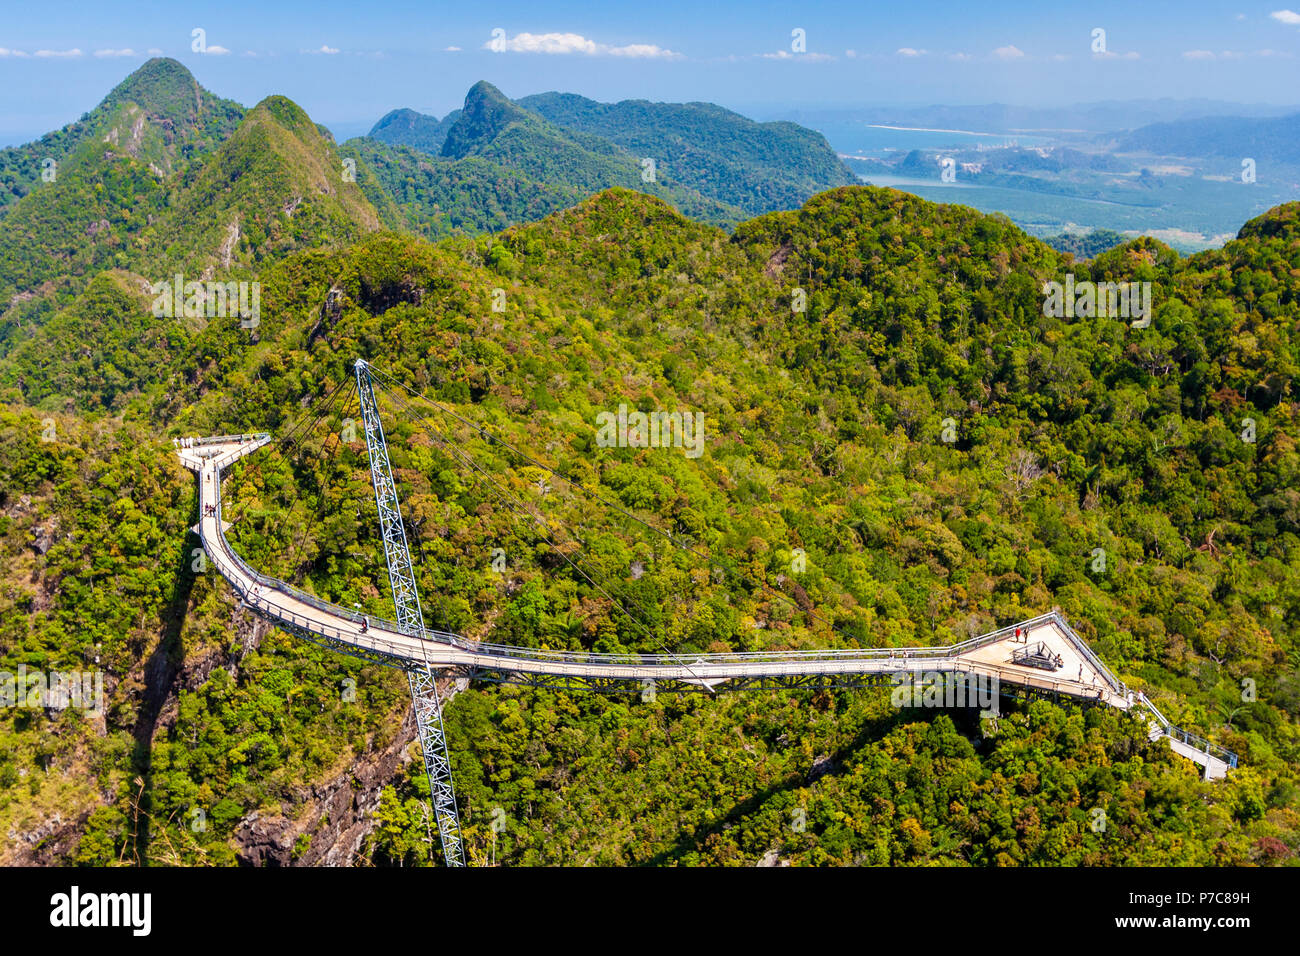 Aerial perspective of the Langkawi Sky Bridge, a curved pedestrian cable-stayed bridge with triangular viewing platforms, connecting two hilltops at... Stock Photo